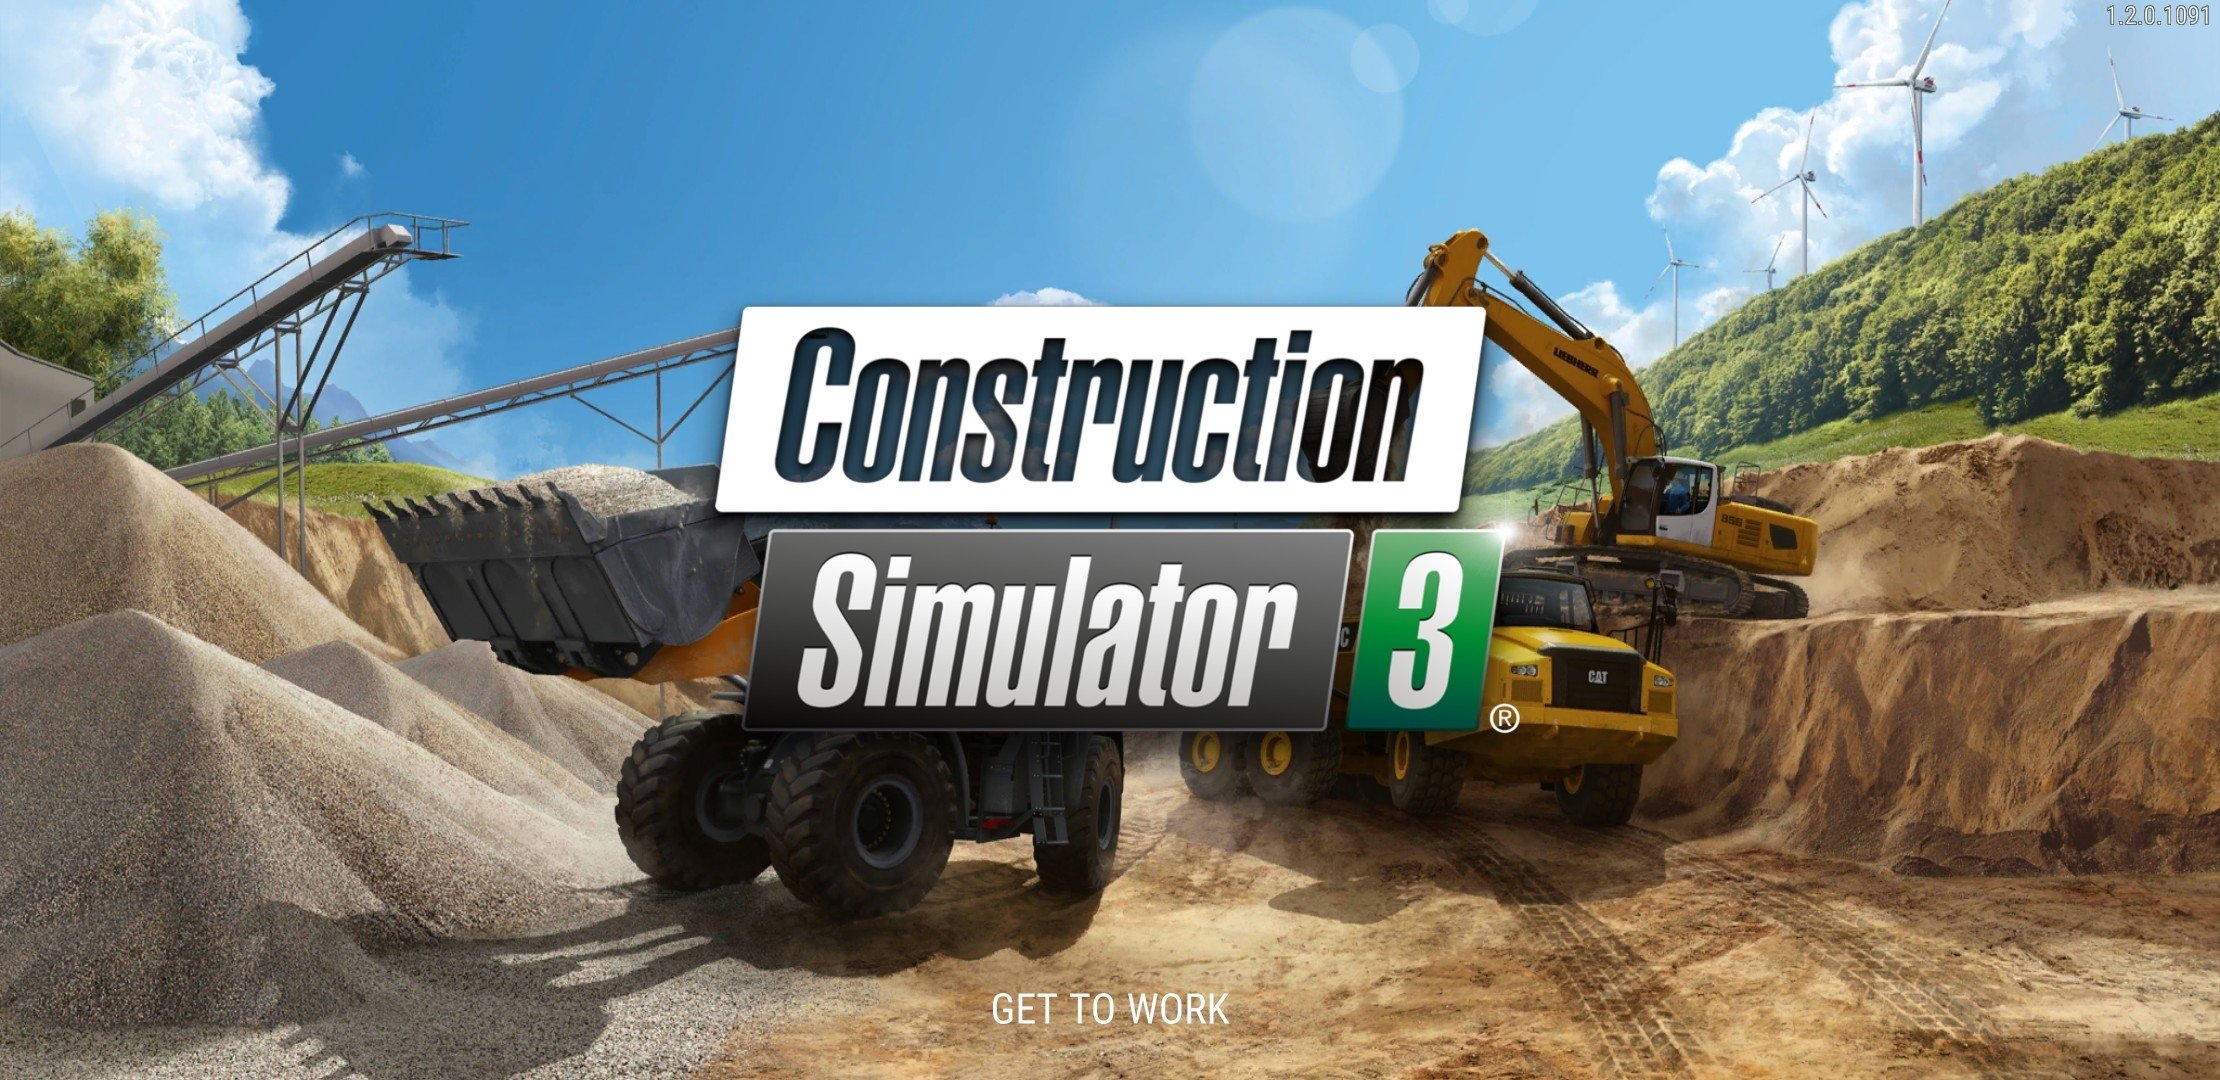 Construction Simulator 2014 Free Download For Android